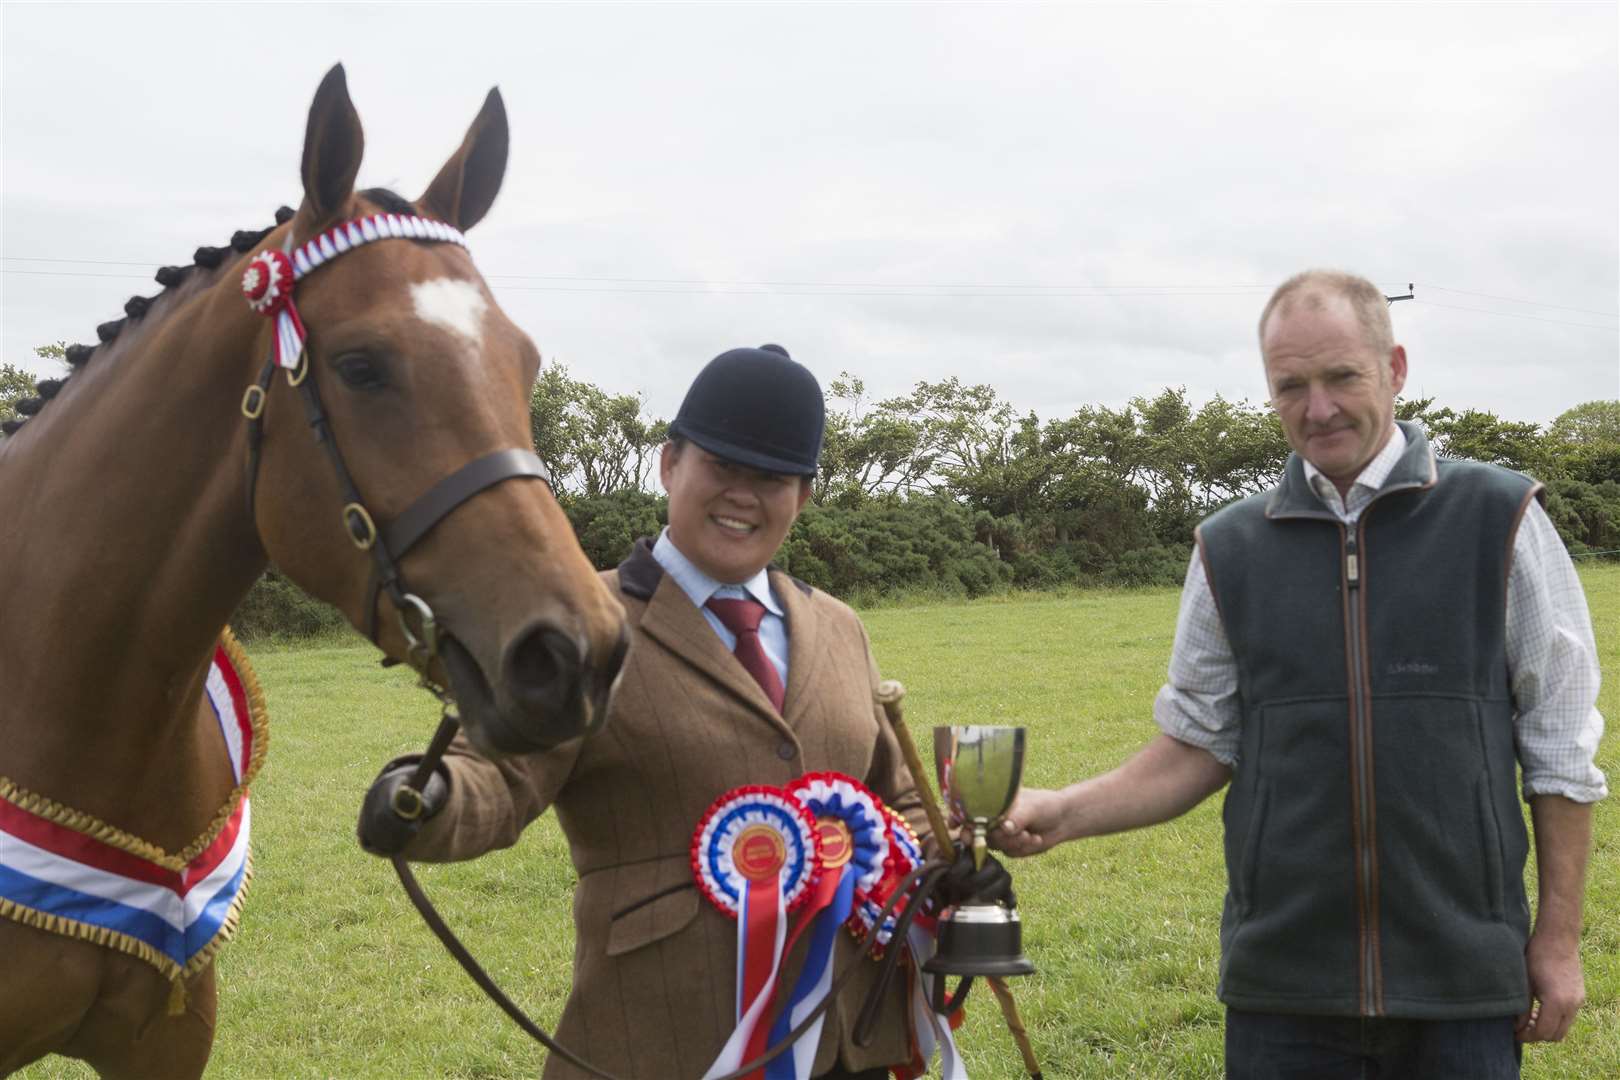 A delighted Kimmy Lai, Dempster Street, Wick, receives the champion of champions trophy from judge, William Macdonald, Tormore, Dunbeath. She won the award with supreme horse champion and light-legged champion, Ashlea's Hollywood Showgirl, a three-year-old by Hollywood. Picture: Robert MacDonald/Northern Studios